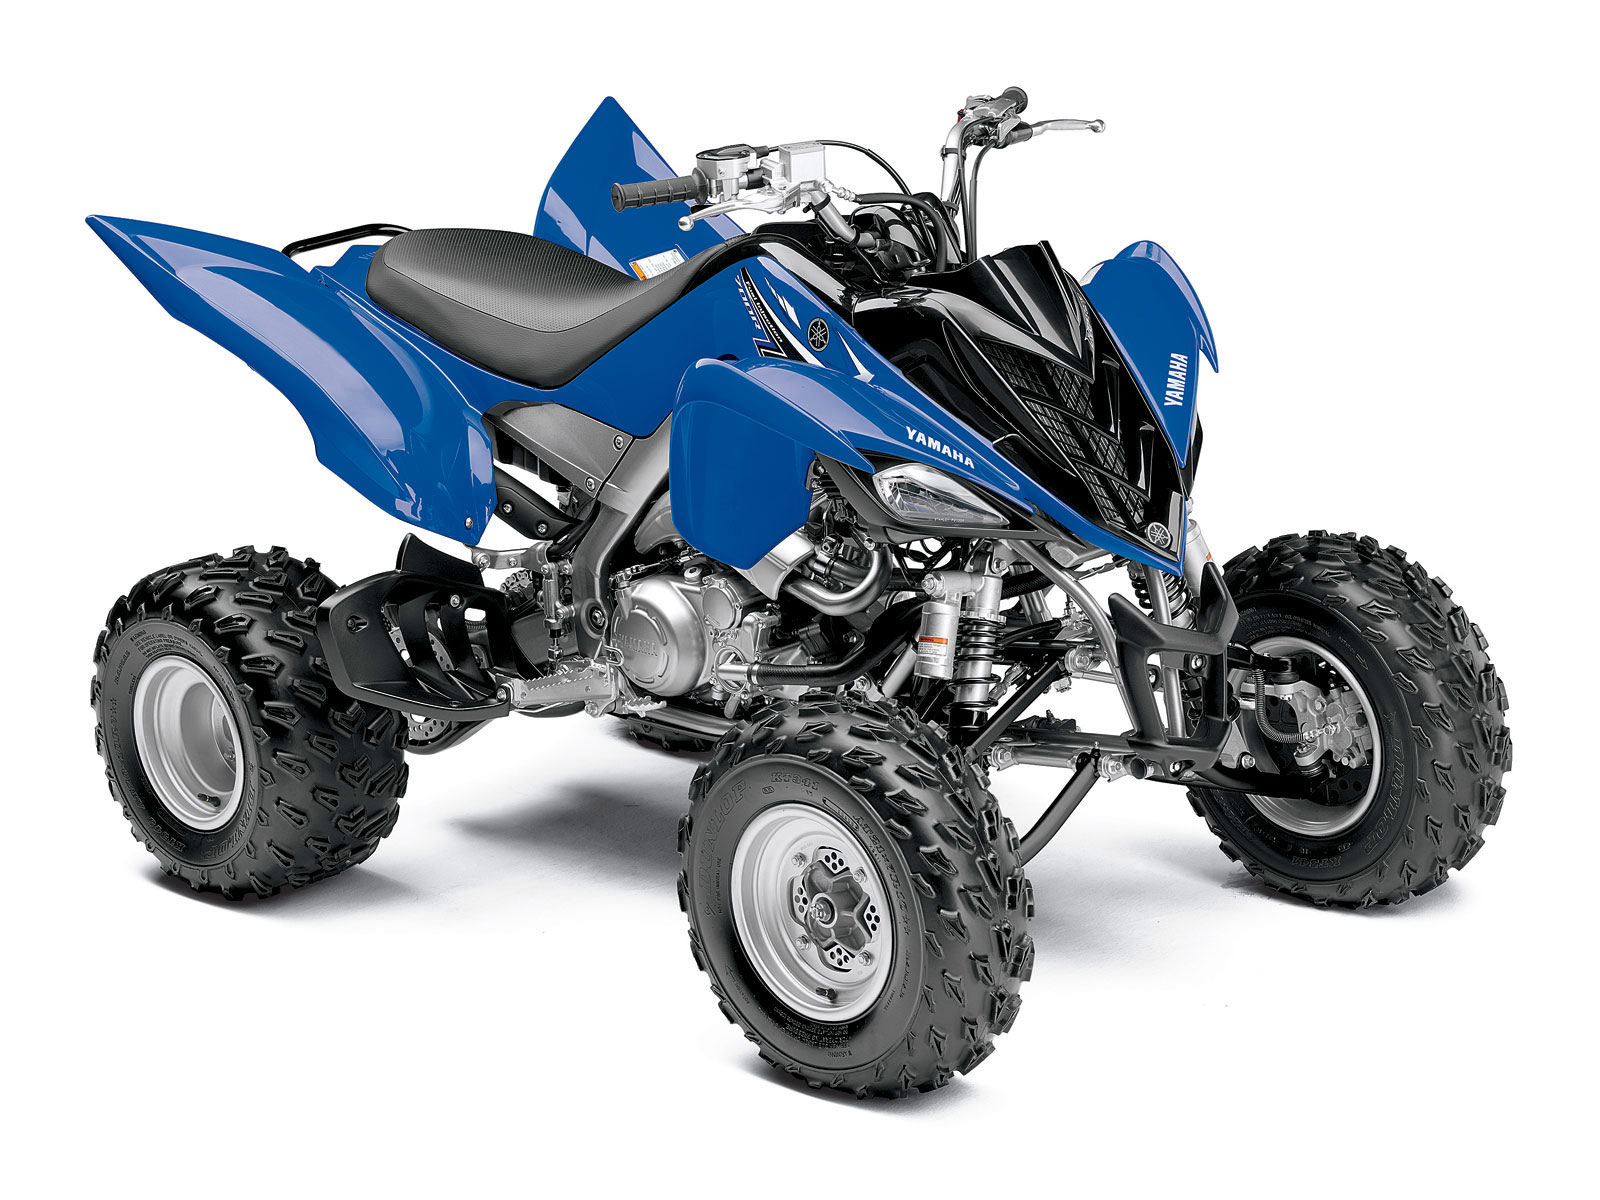 YAMAHA pictures   2011 Raptor 700R specifications